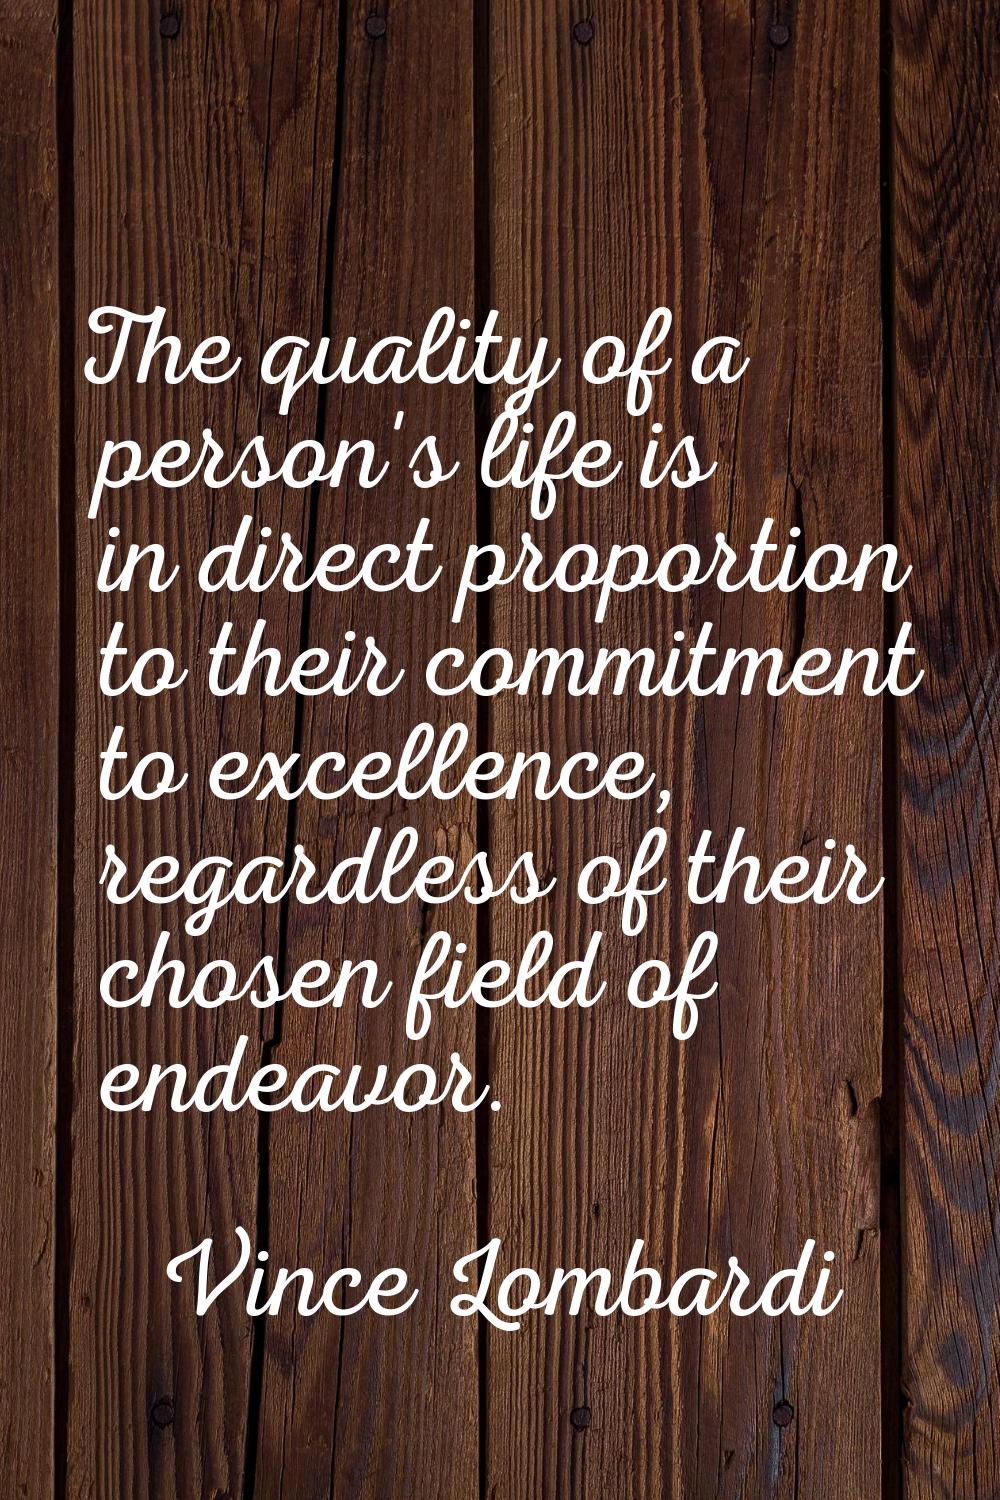 The quality of a person's life is in direct proportion to their commitment to excellence, regardles